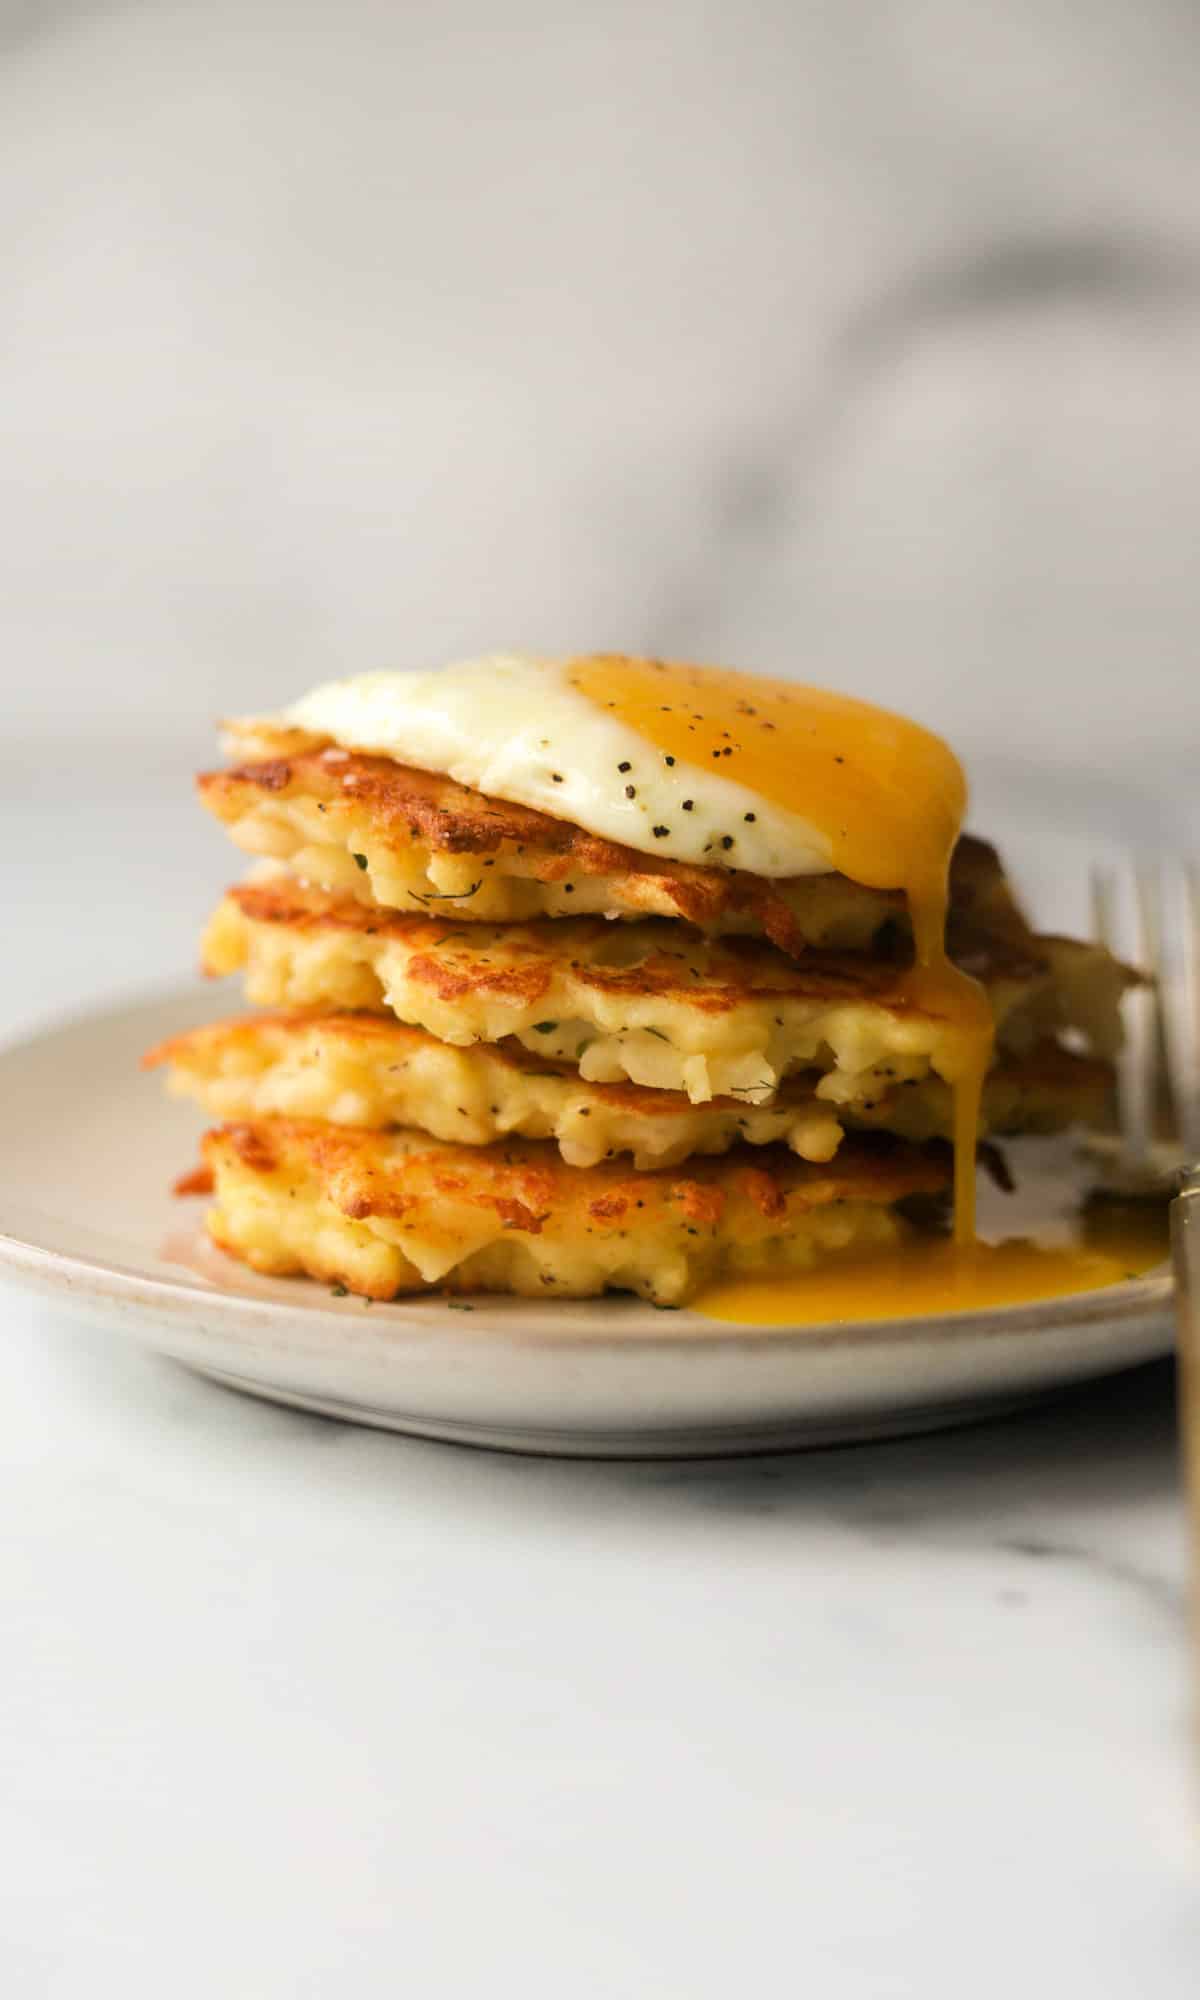 A side shot of a stack of crispy hash brown patties with a runny egg on top.